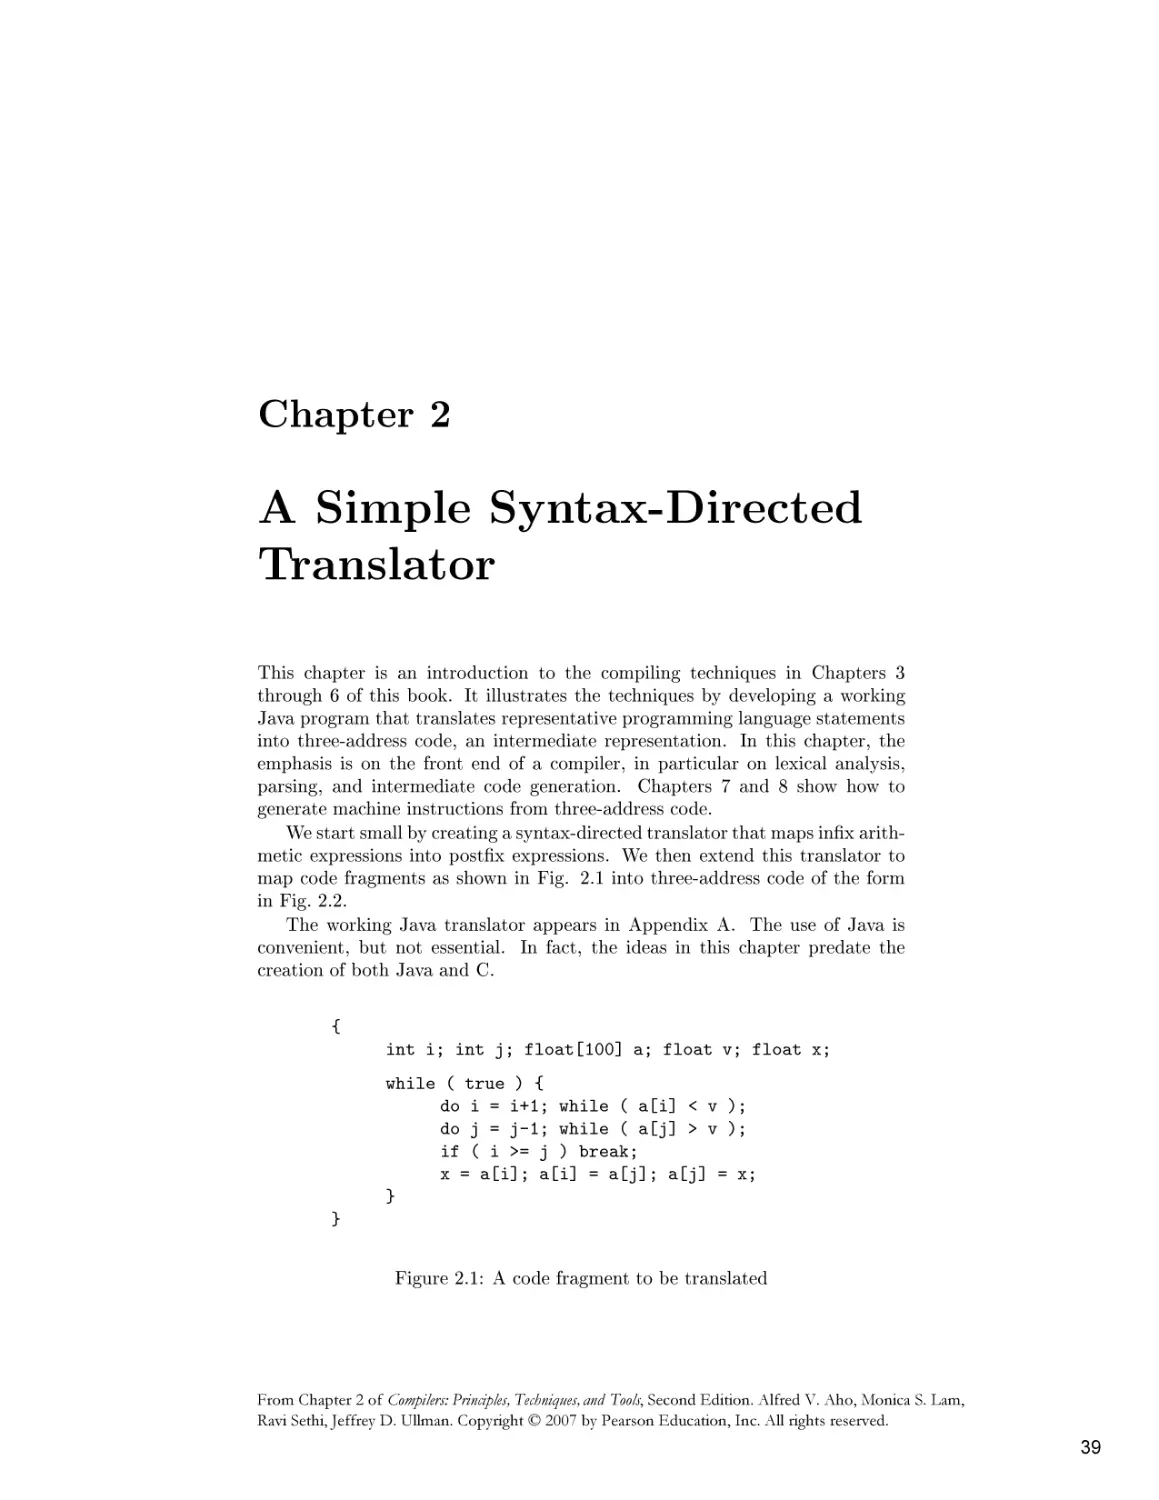 Chapter 2. A Simple Syntax-Directed Translator